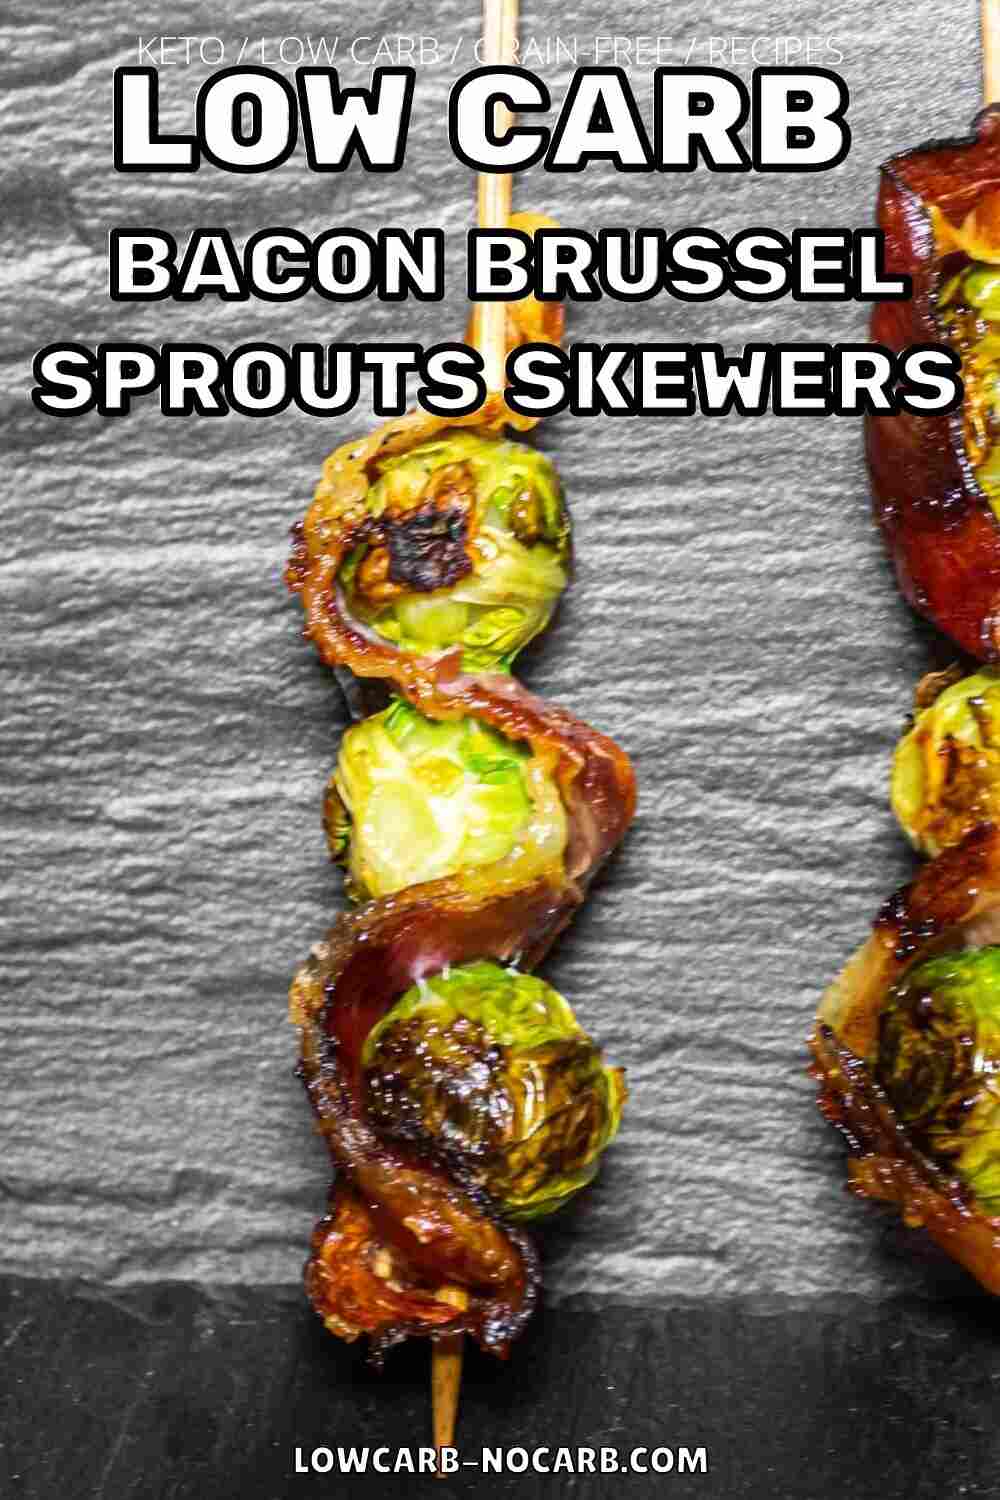 Low carb bacon brussels sprouts skewers.